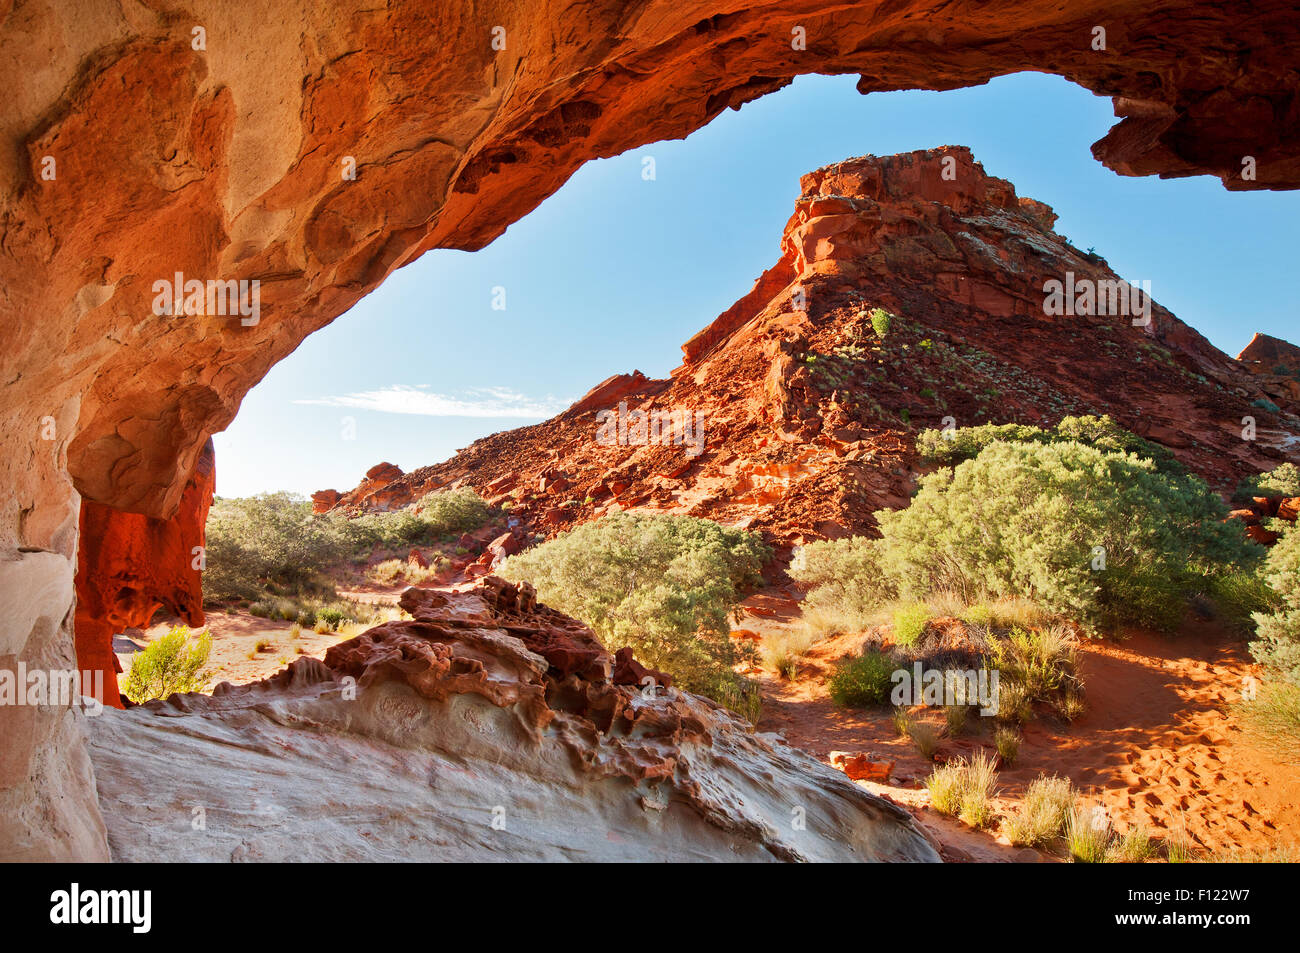 Fascinating rock formations in Rainbow Valley. Stock Photo